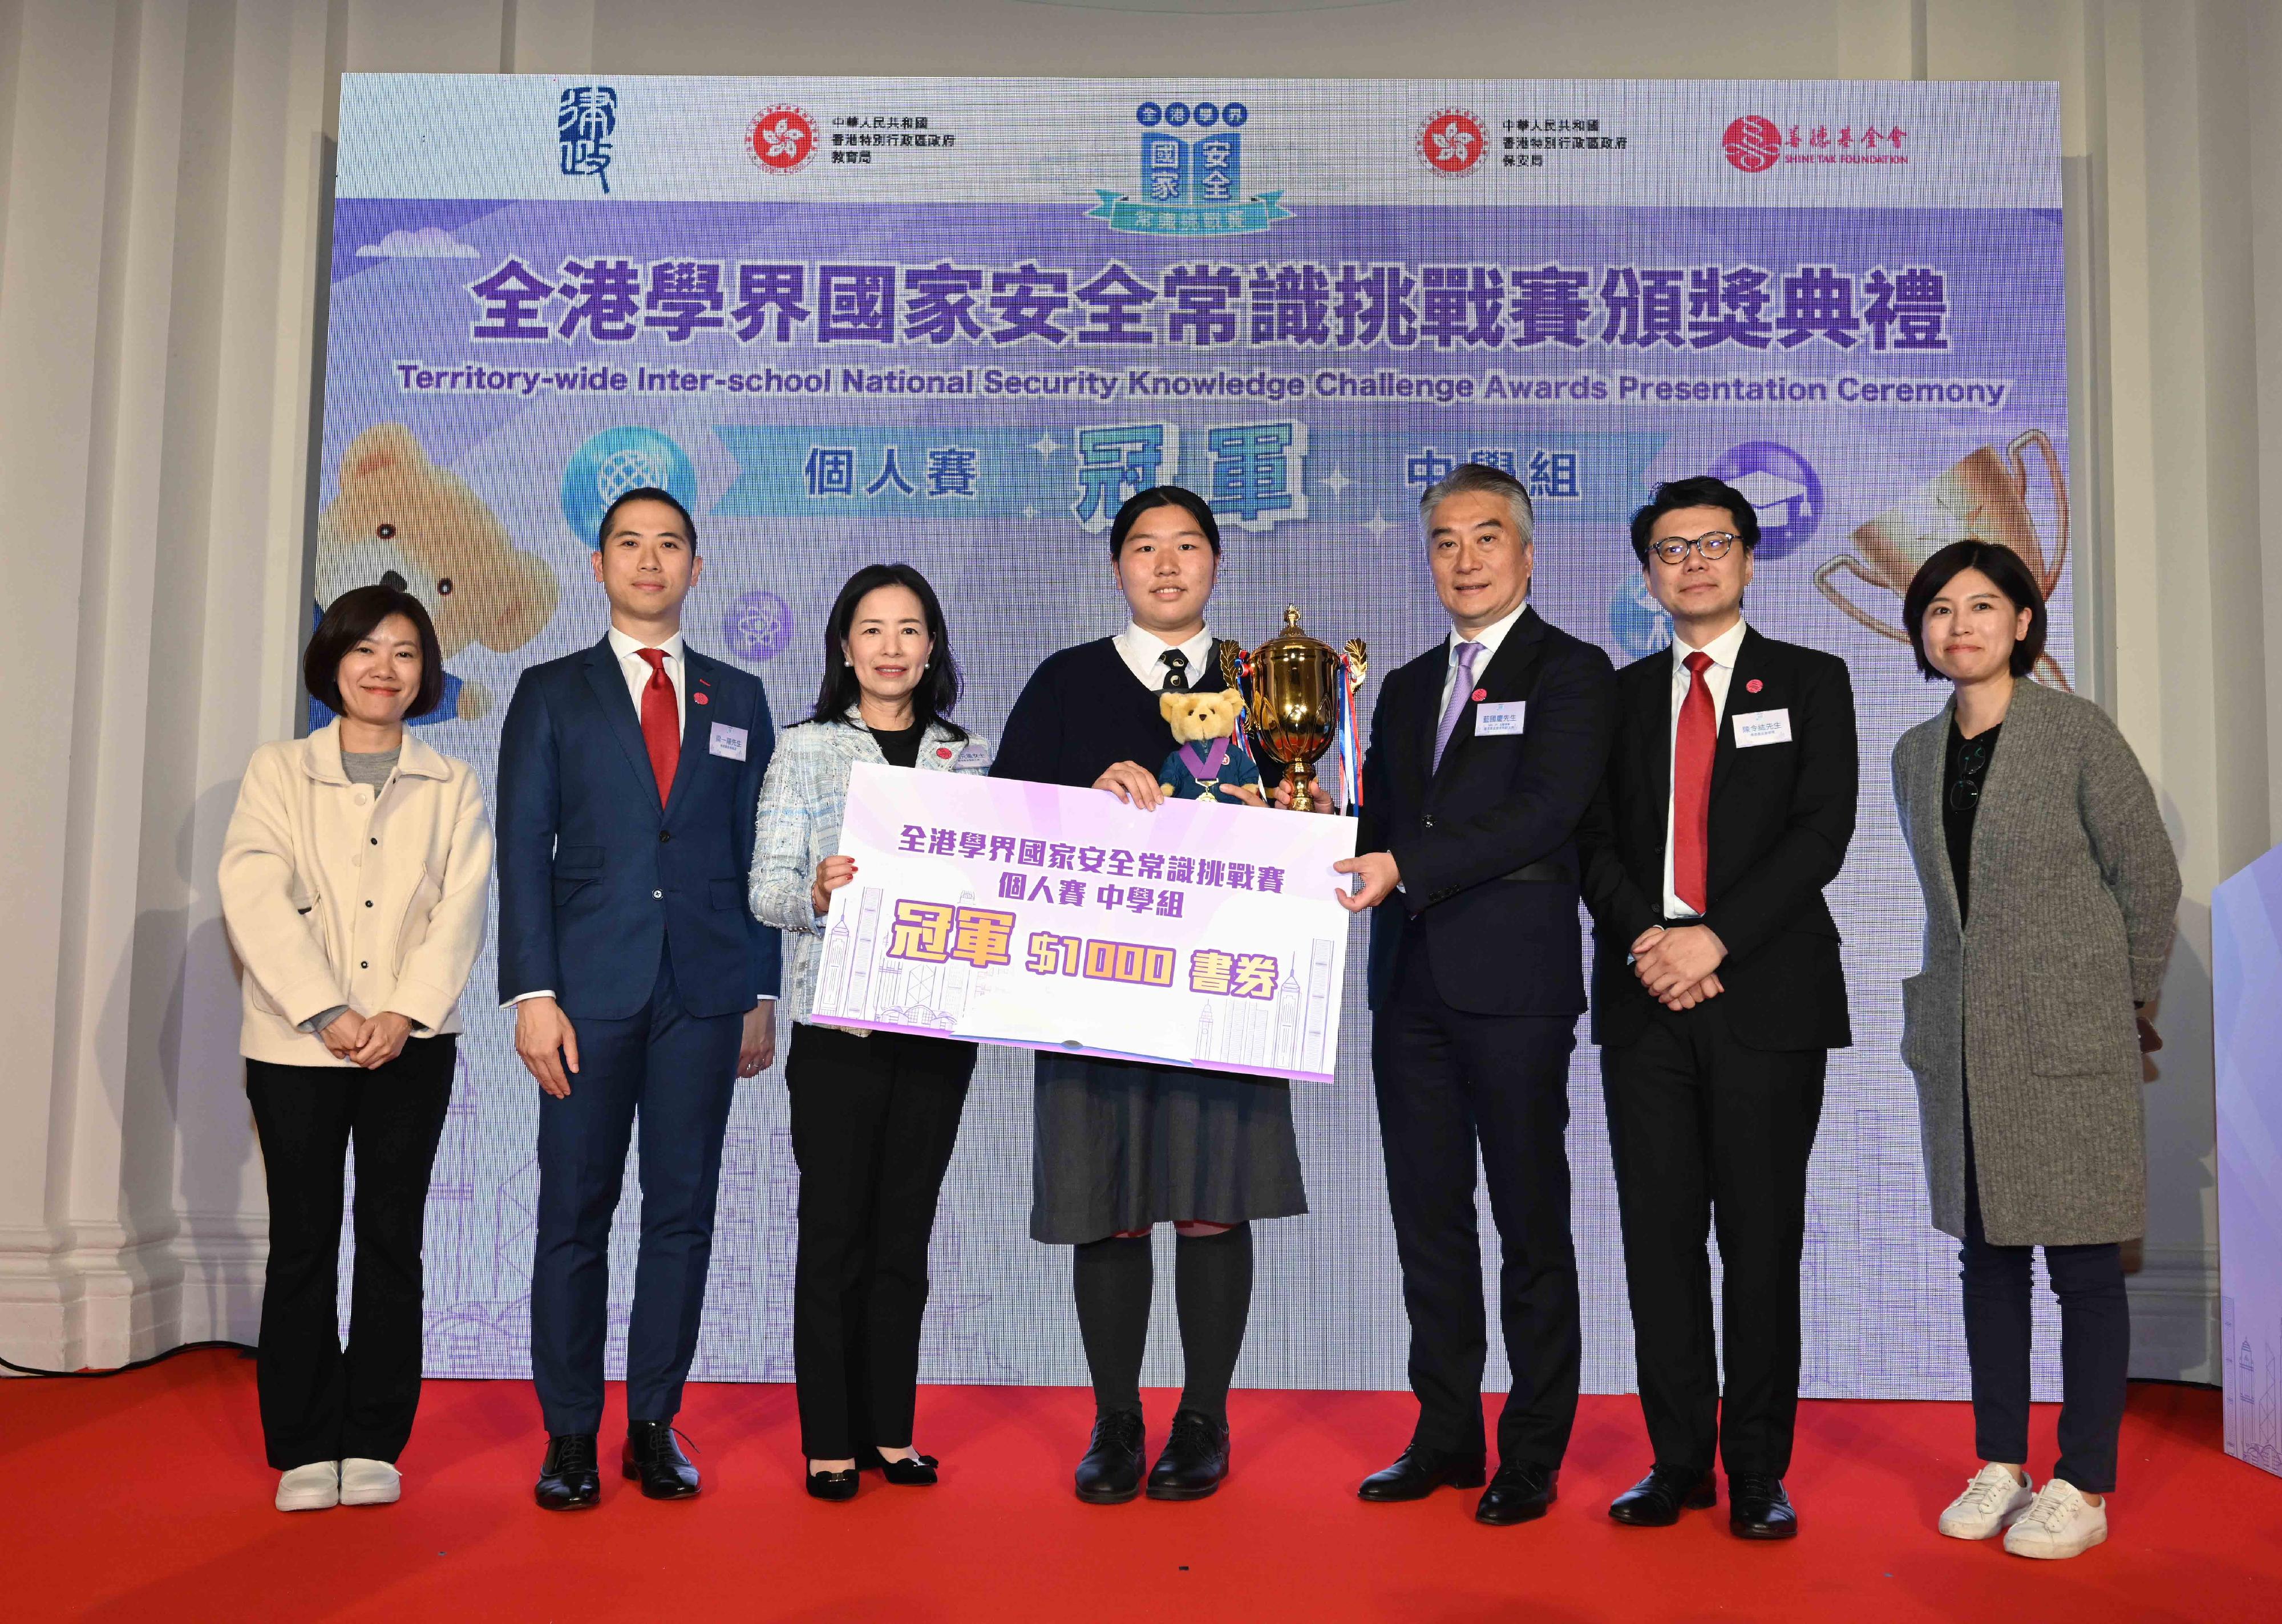 The Territory-wide Inter-school National Security Knowledge Challenge, jointly organised by the Department of Justice, the Security Bureau, the Education Bureau and the Hong Kong Shine Tak Foundation, held its finals this morning (February 26), and a prize presentation ceremony at the former French Mission Building in the afternoon. Photo shows guests presenting the Champion award of secondary school individual competition to the winner from the Hong Kong Taoist Association Tang Hin Memorial Secondary School.